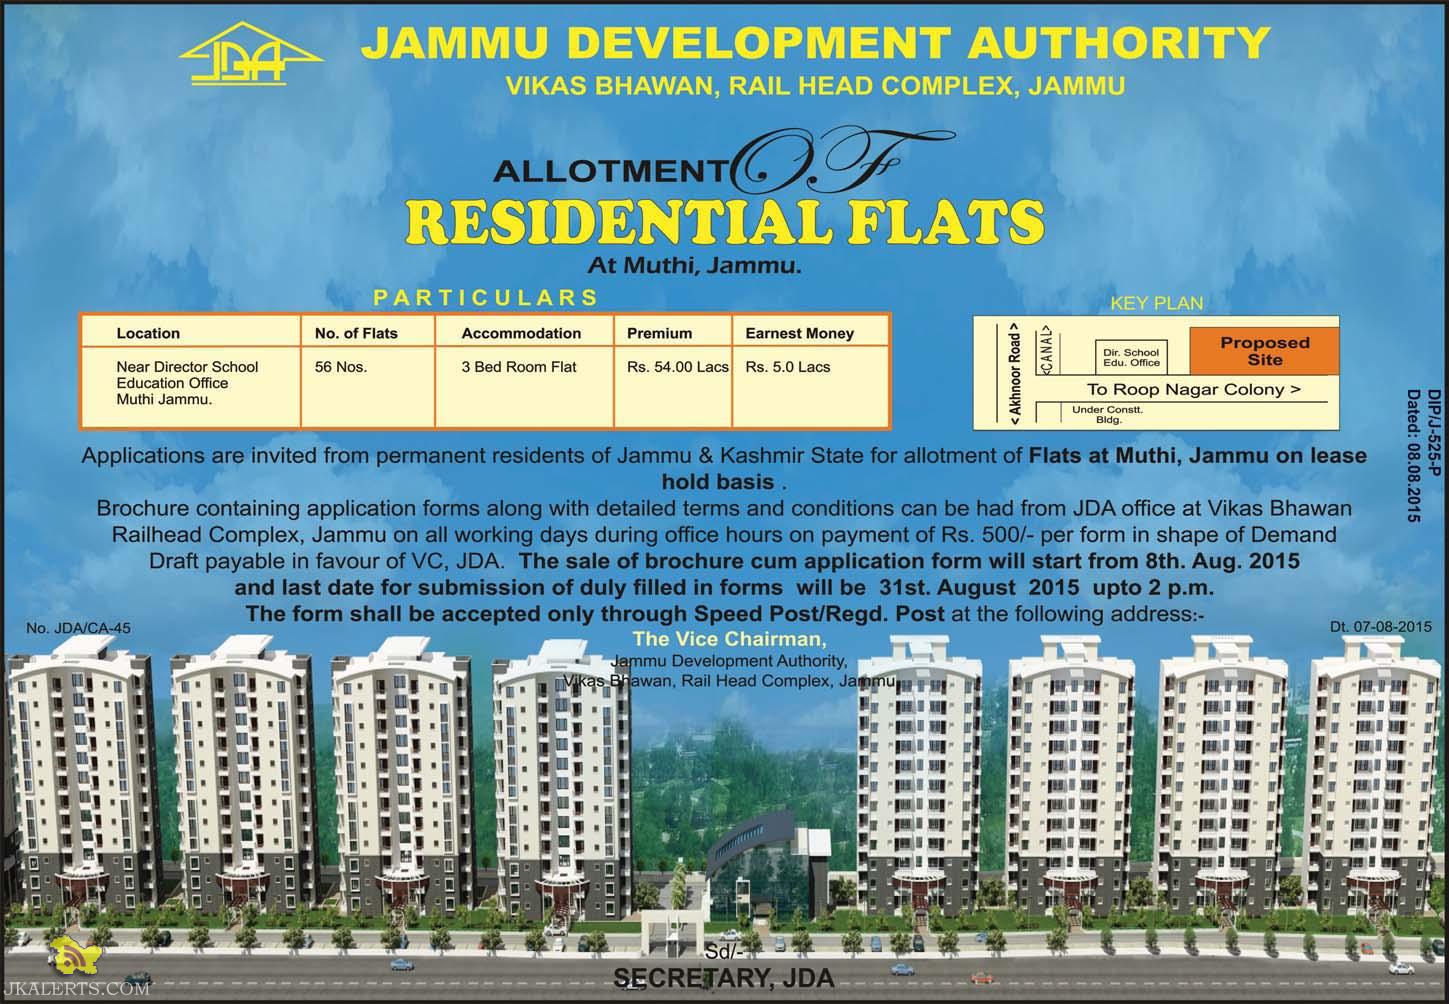 JDA Allotment of residential Flats at Muthi, Jammu, Sale of Flats, sale of Jda Flats in jammu, Jda new residential colony in jammu, 3 bhk flats in jammu